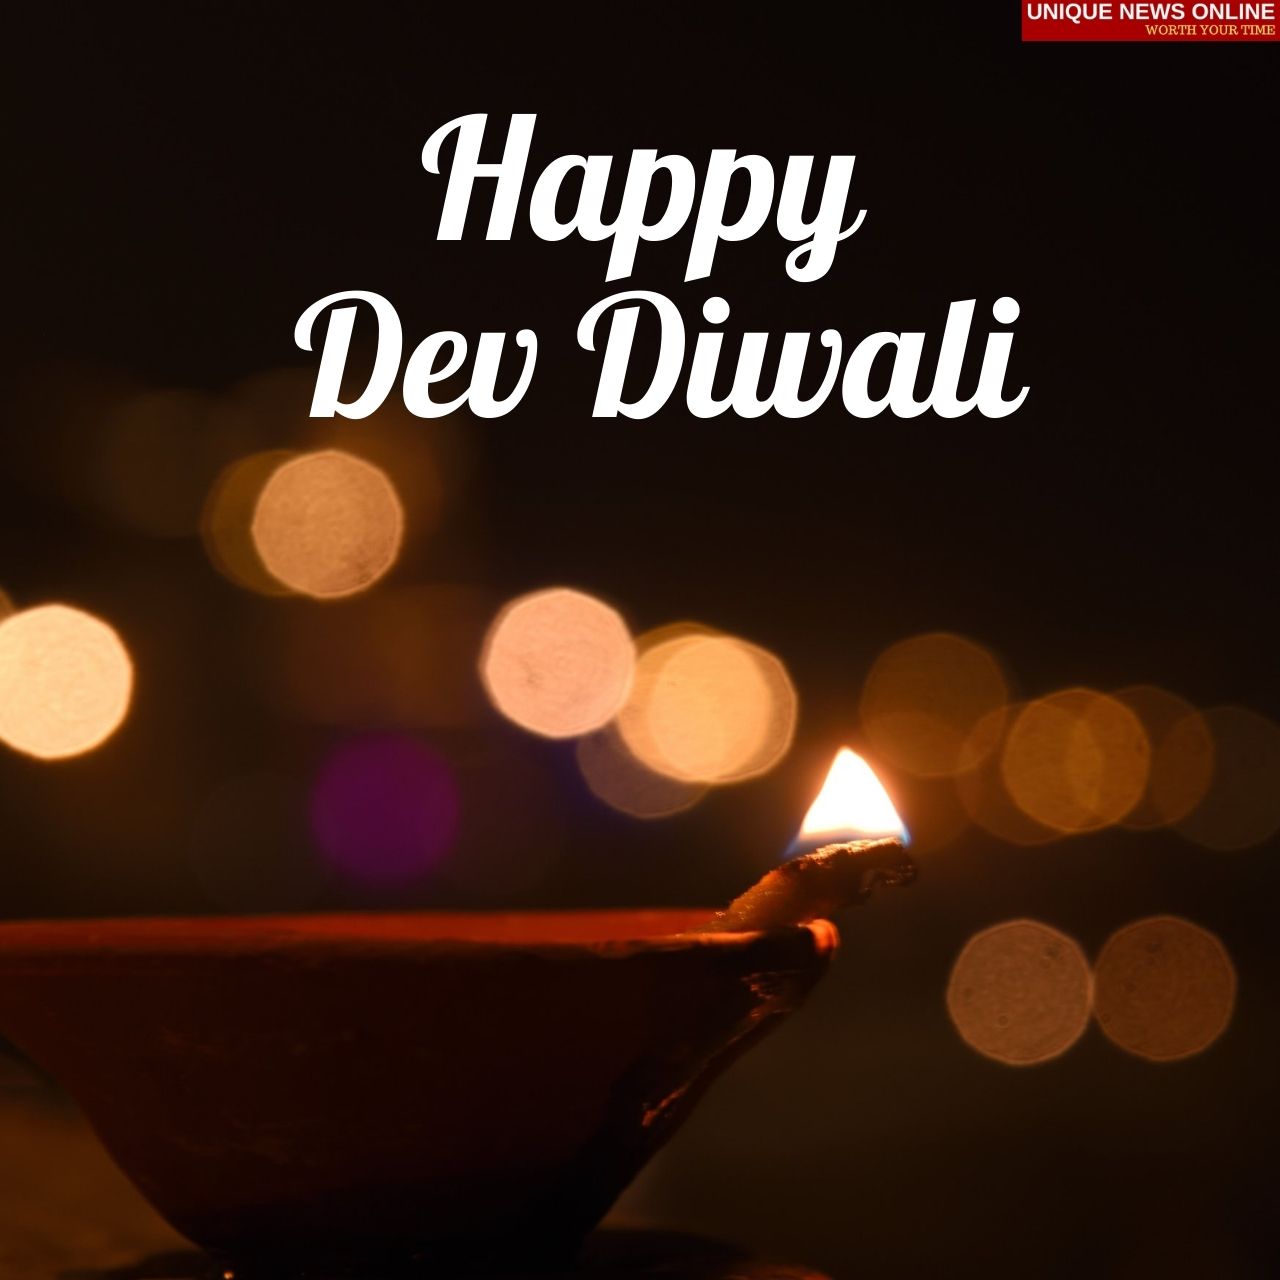 Happy Dev Diwali 2021 Wishes, Quotes, HD Images, Greetings, and